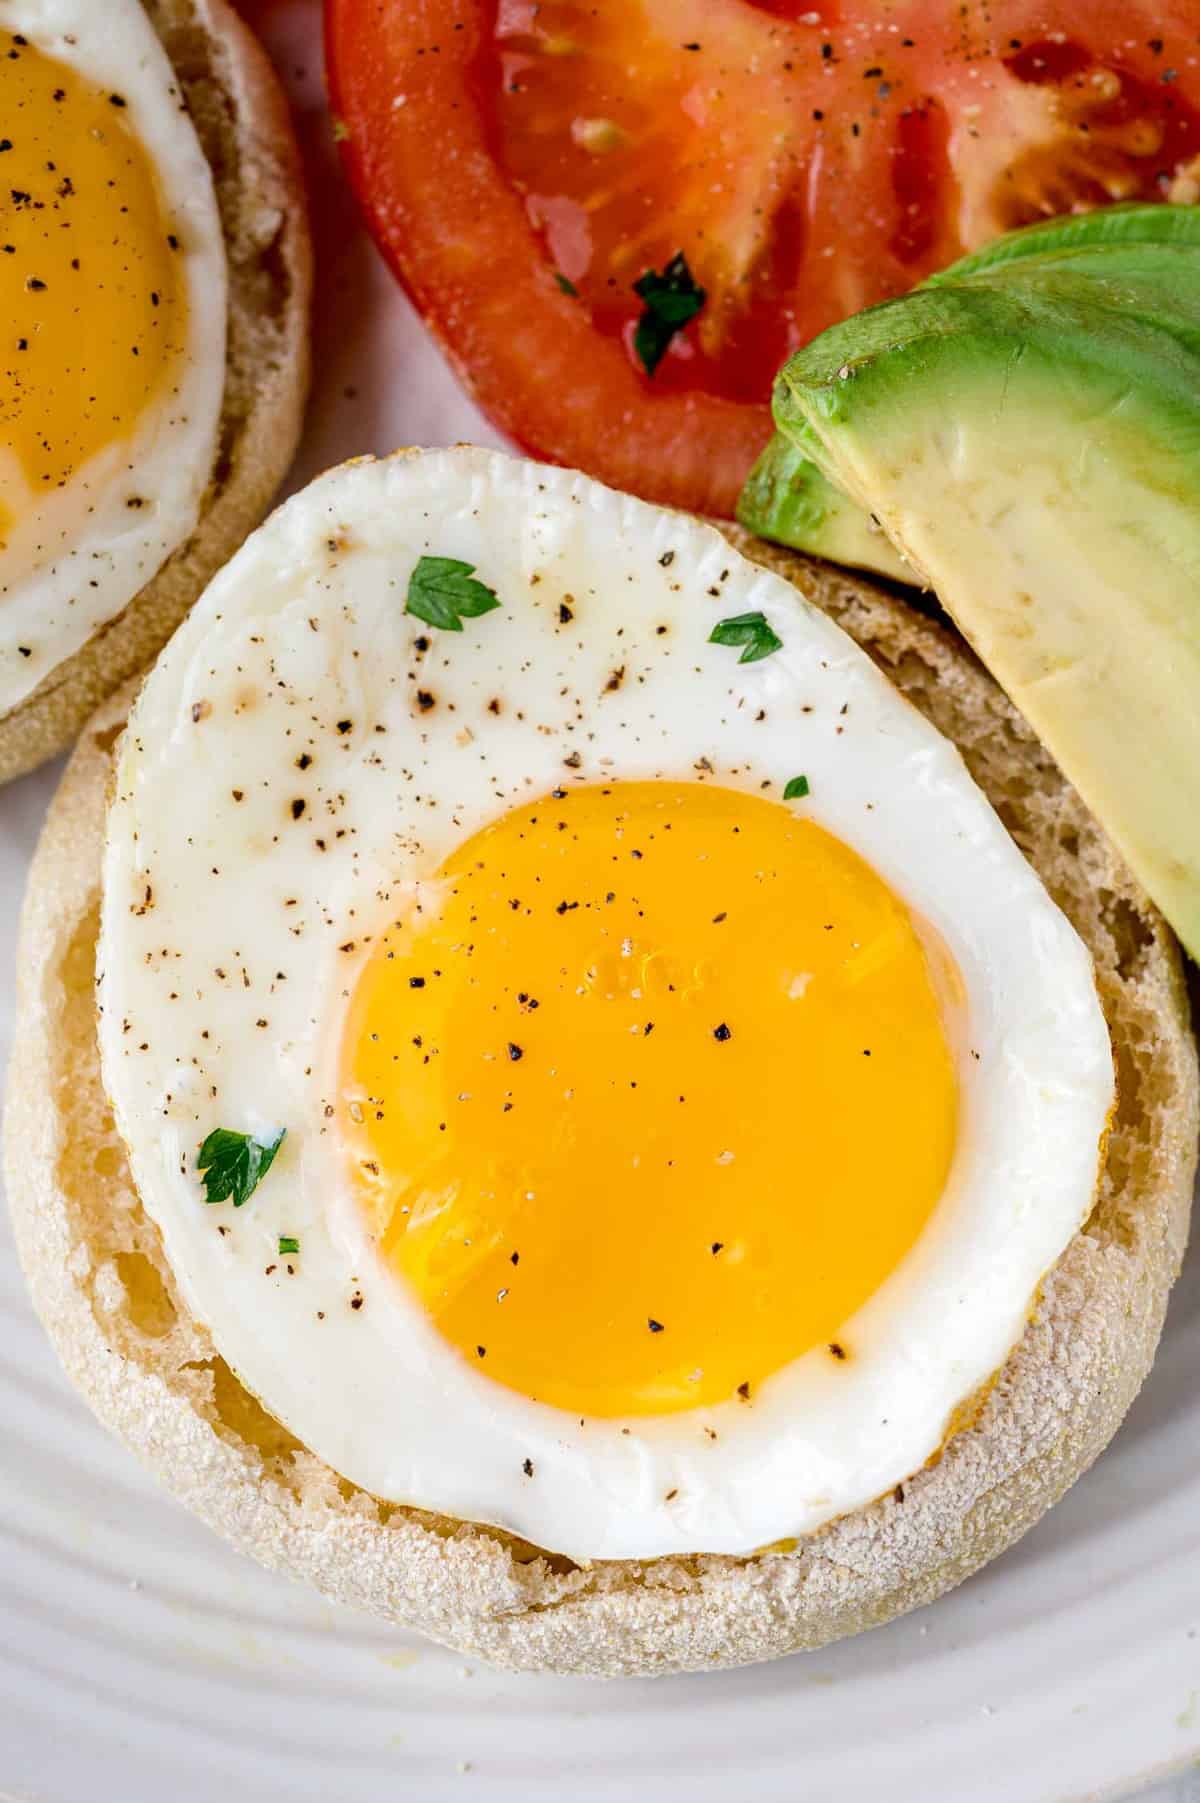 Sunny side up egg on a plate with avocado and tomato.